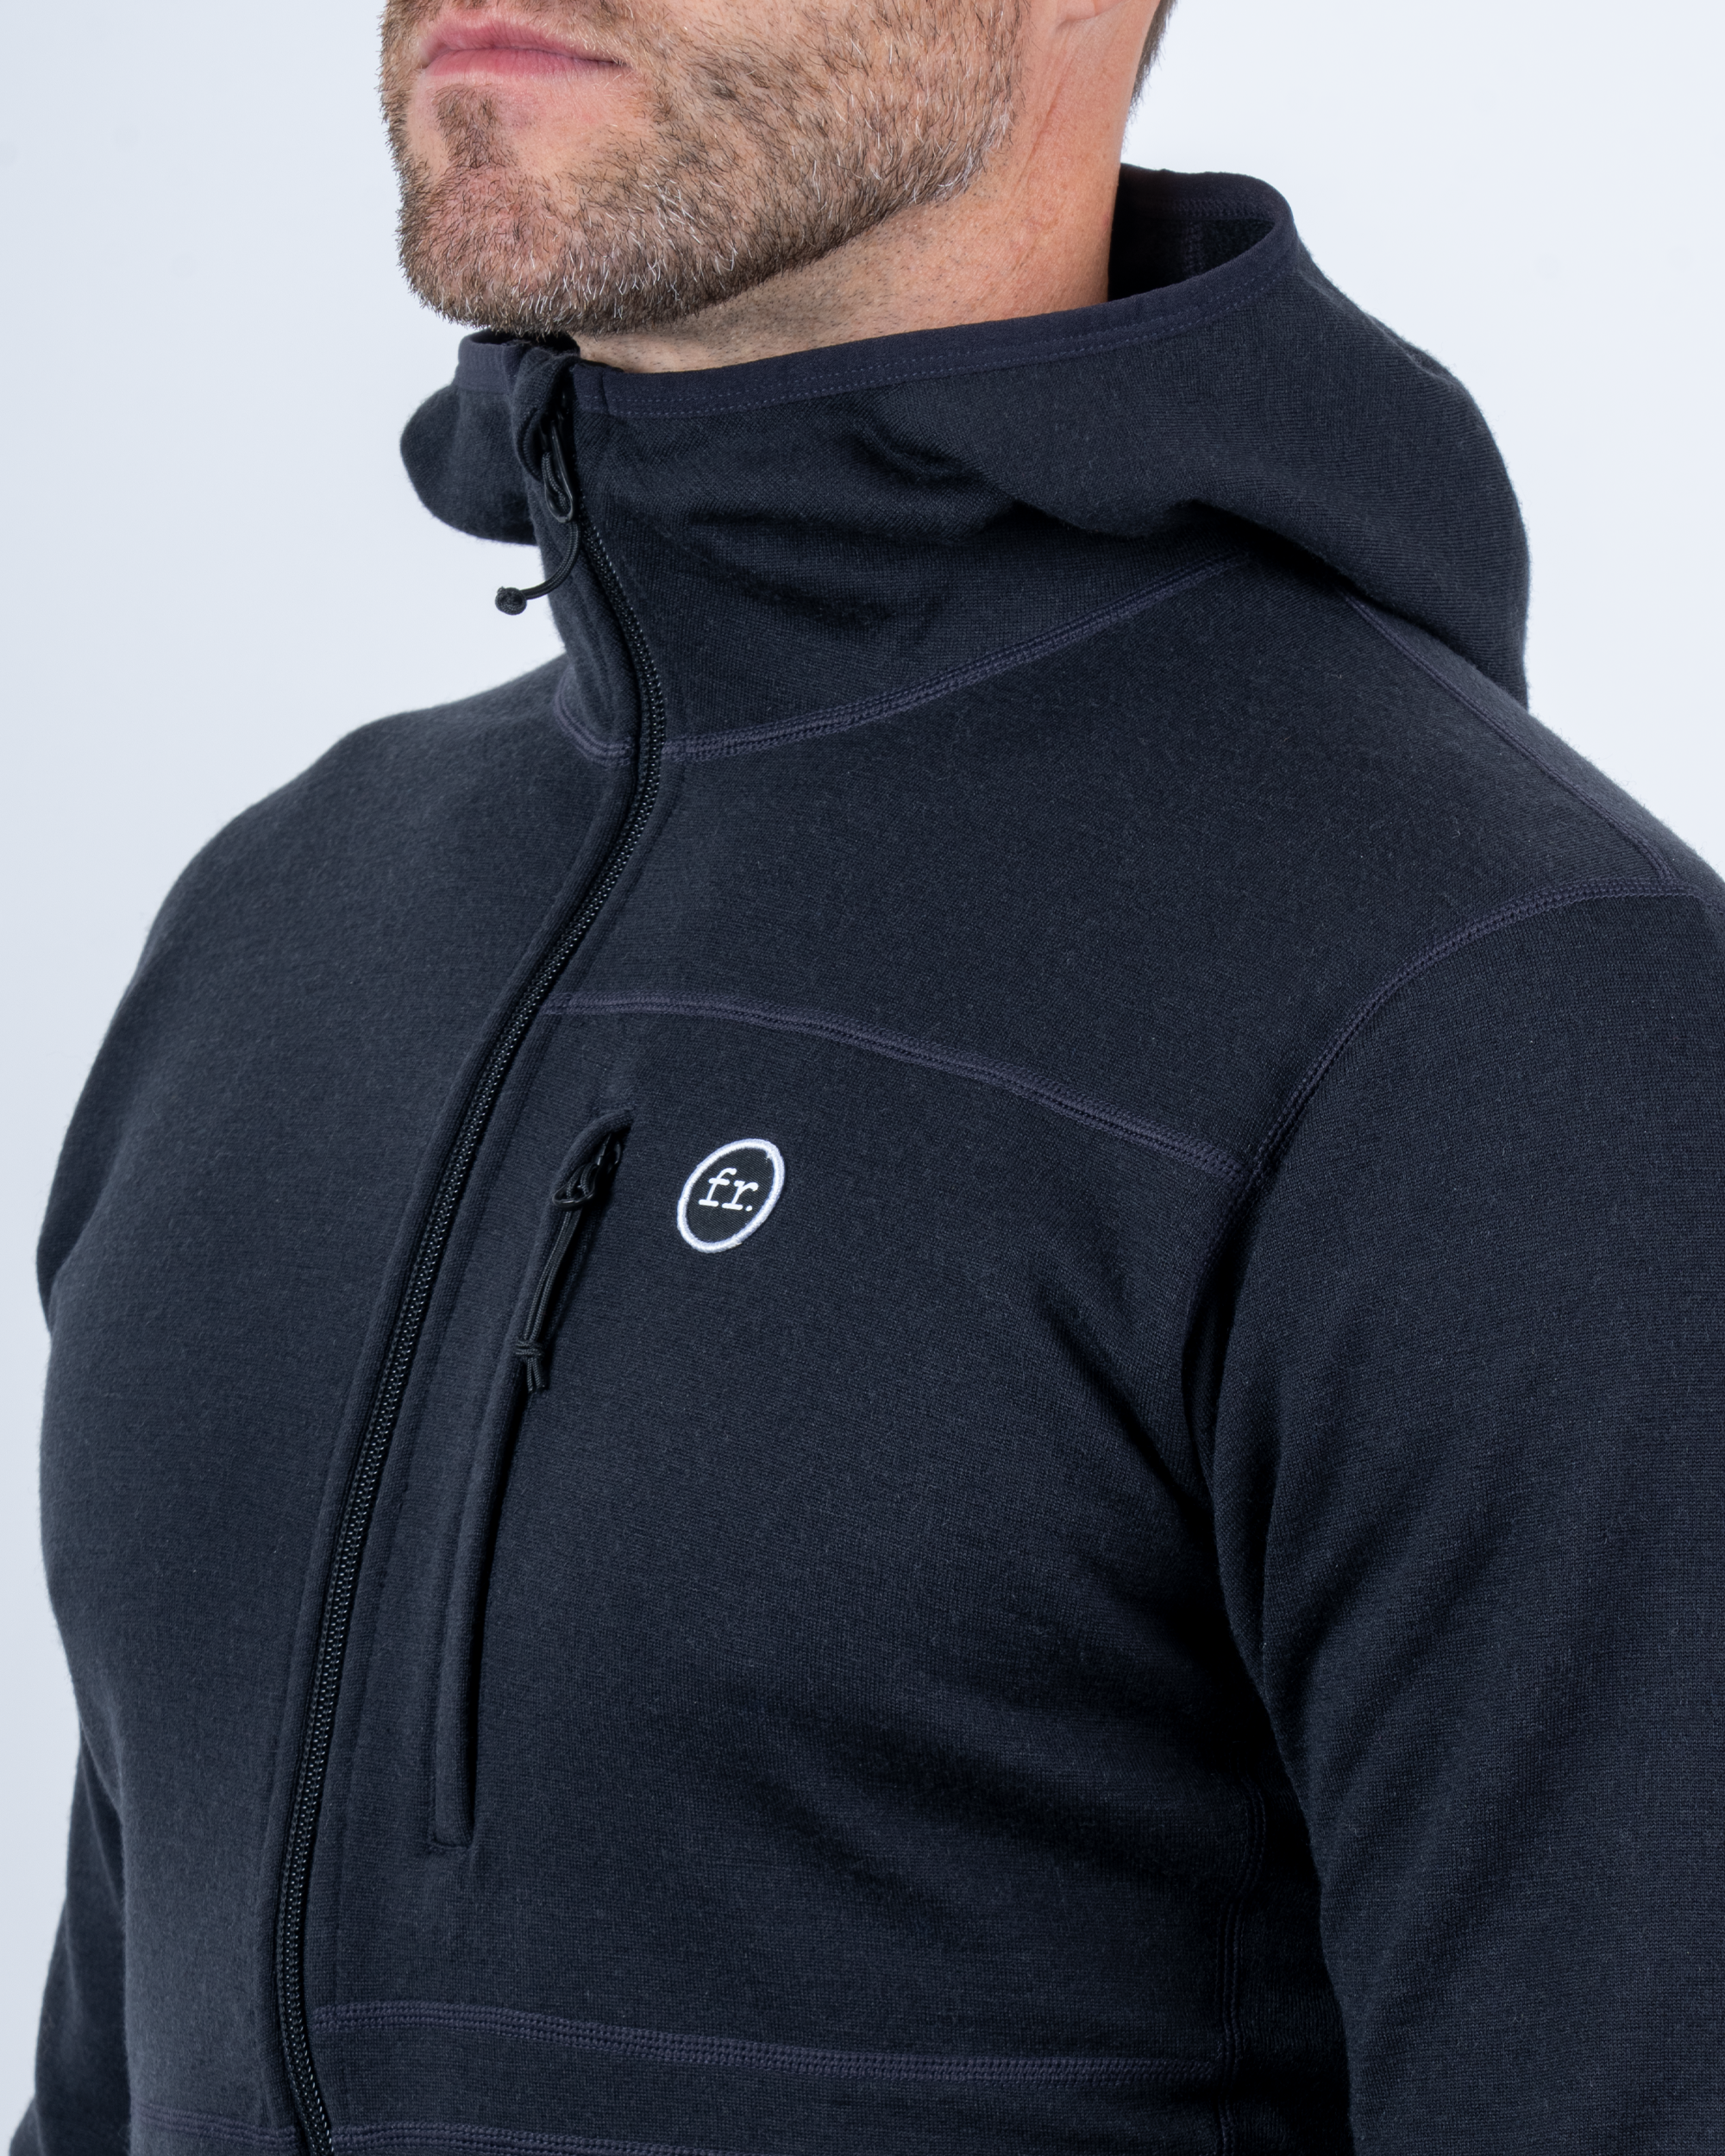 Foreign Rider Co Nuyarn Merino Wool Black Hooded Jacket Chest Logo and Zip Pocket